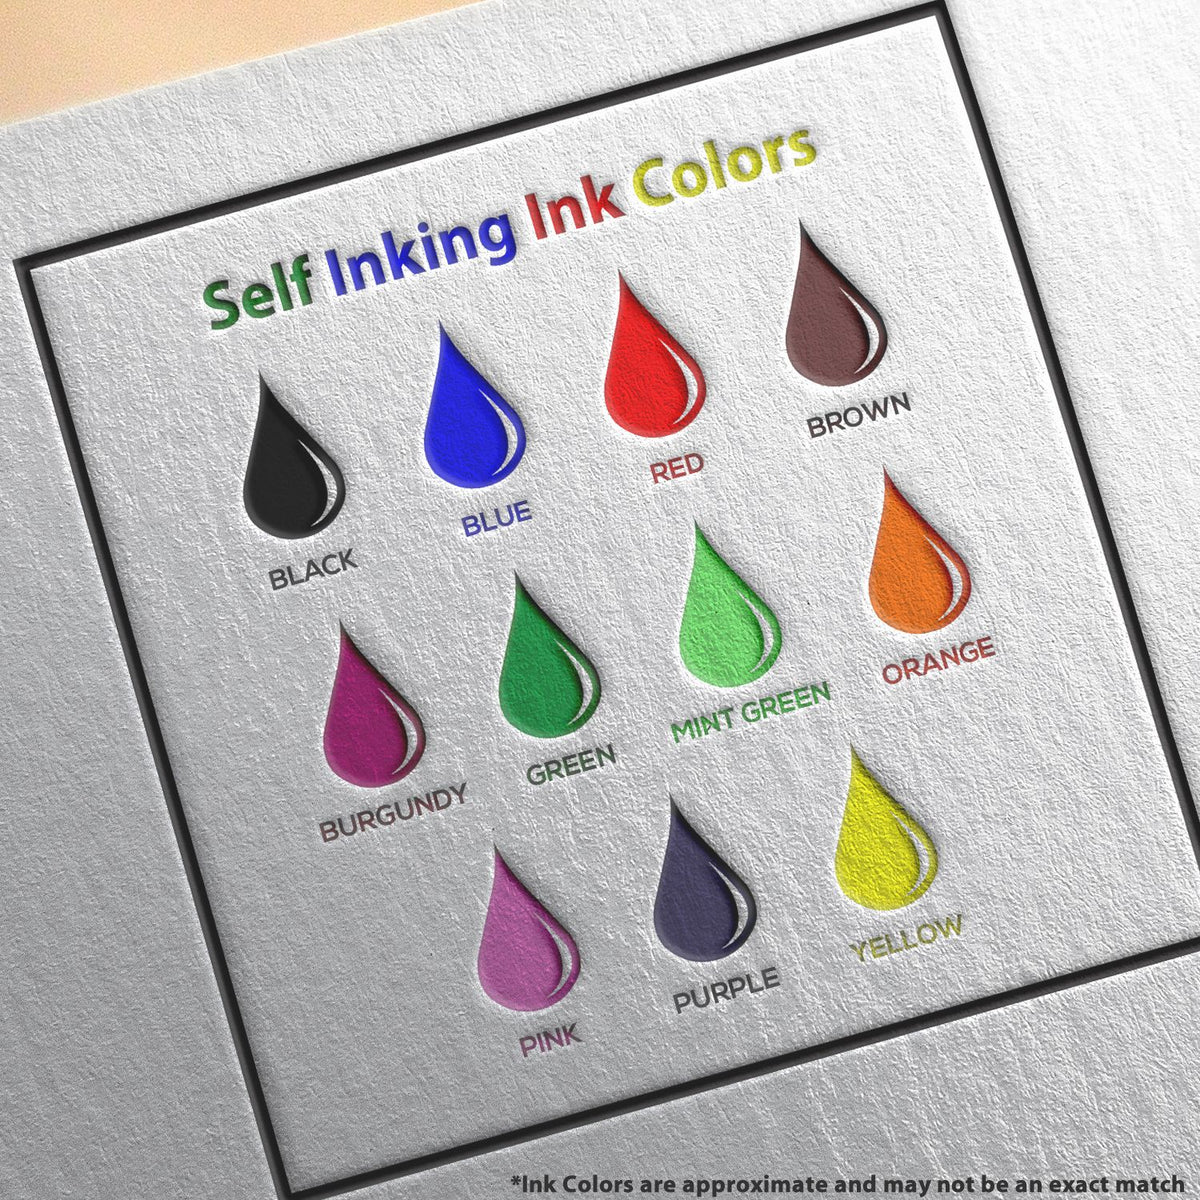 A picture showing the different ink colors or hues available for the Self-Inking North Dakota Geologist Stamp